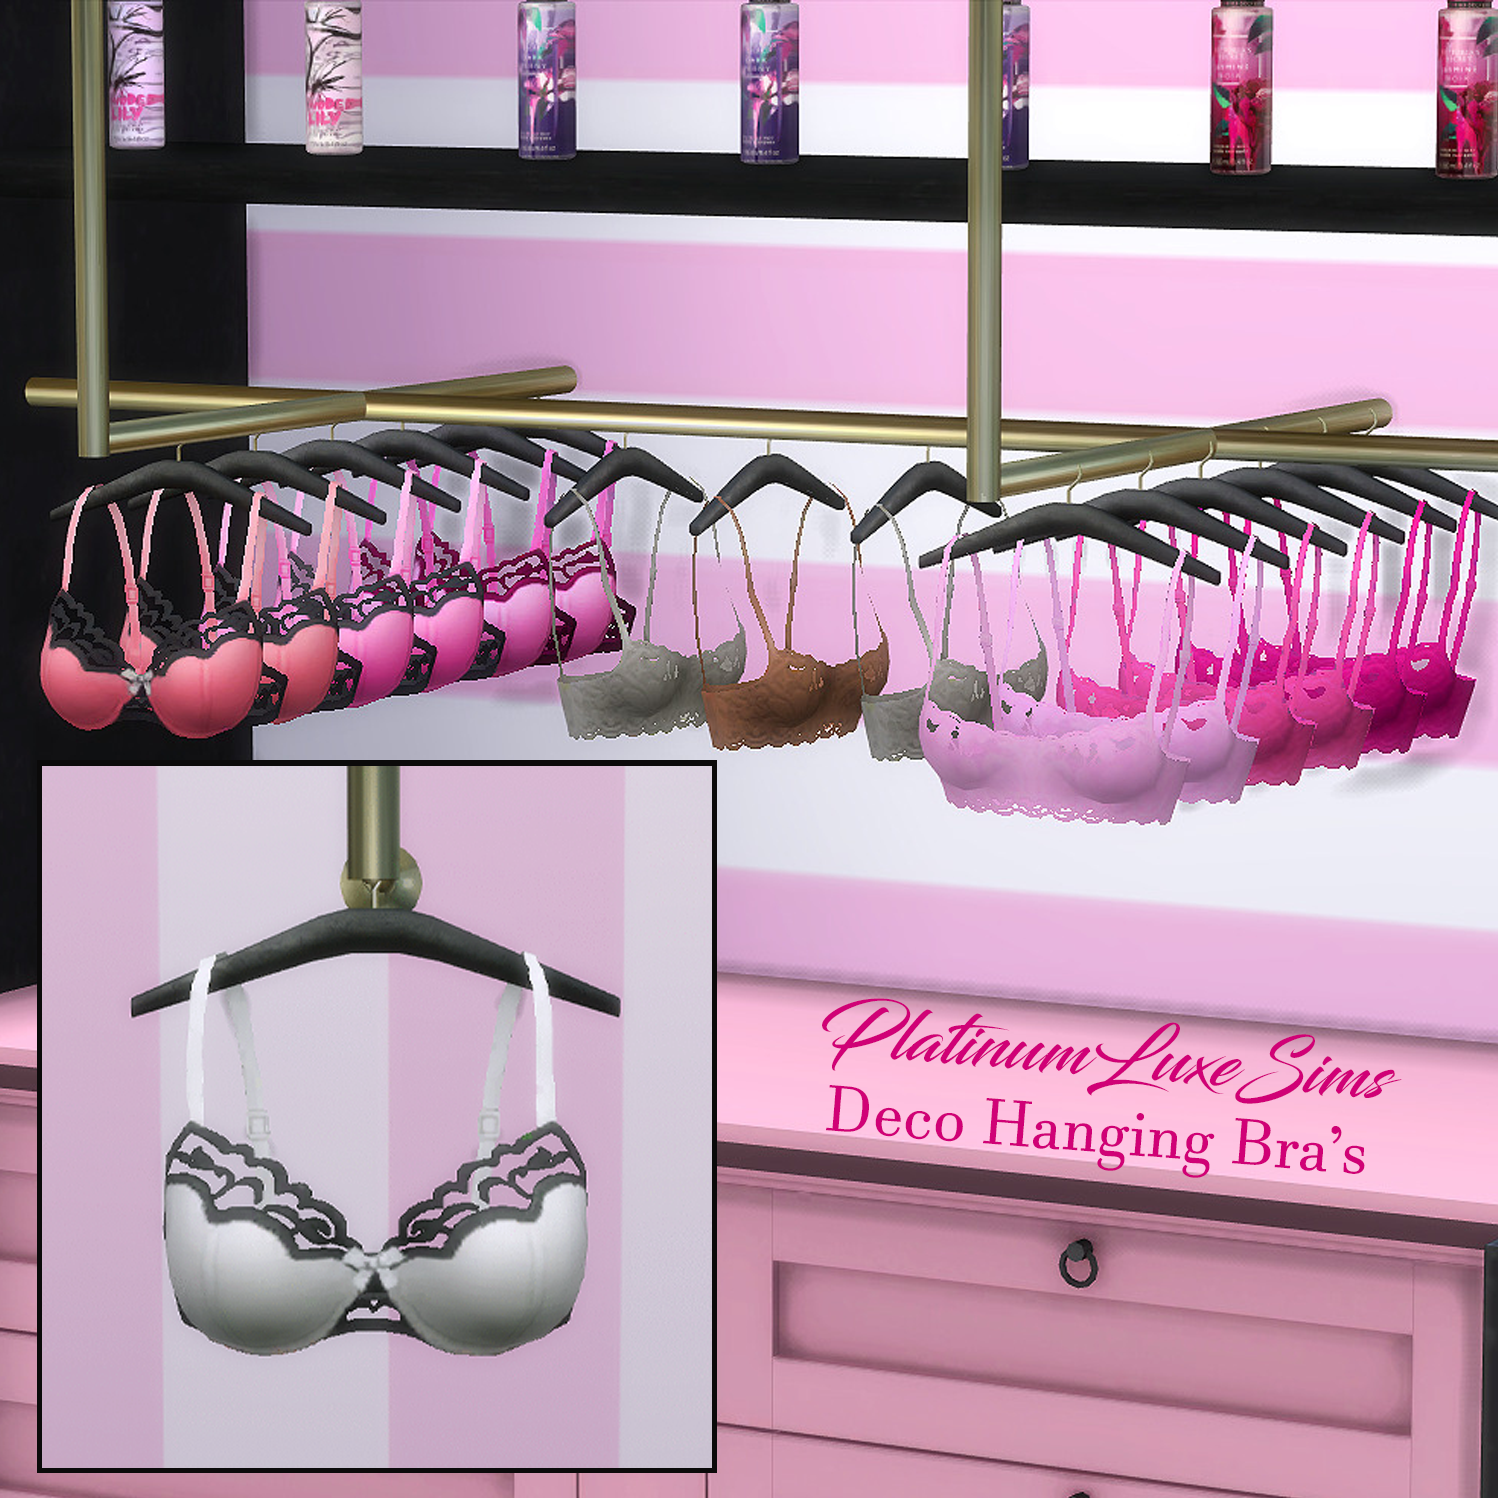 Deco Hanging Bra's - The Sims 4 Build / Buy - CurseForge